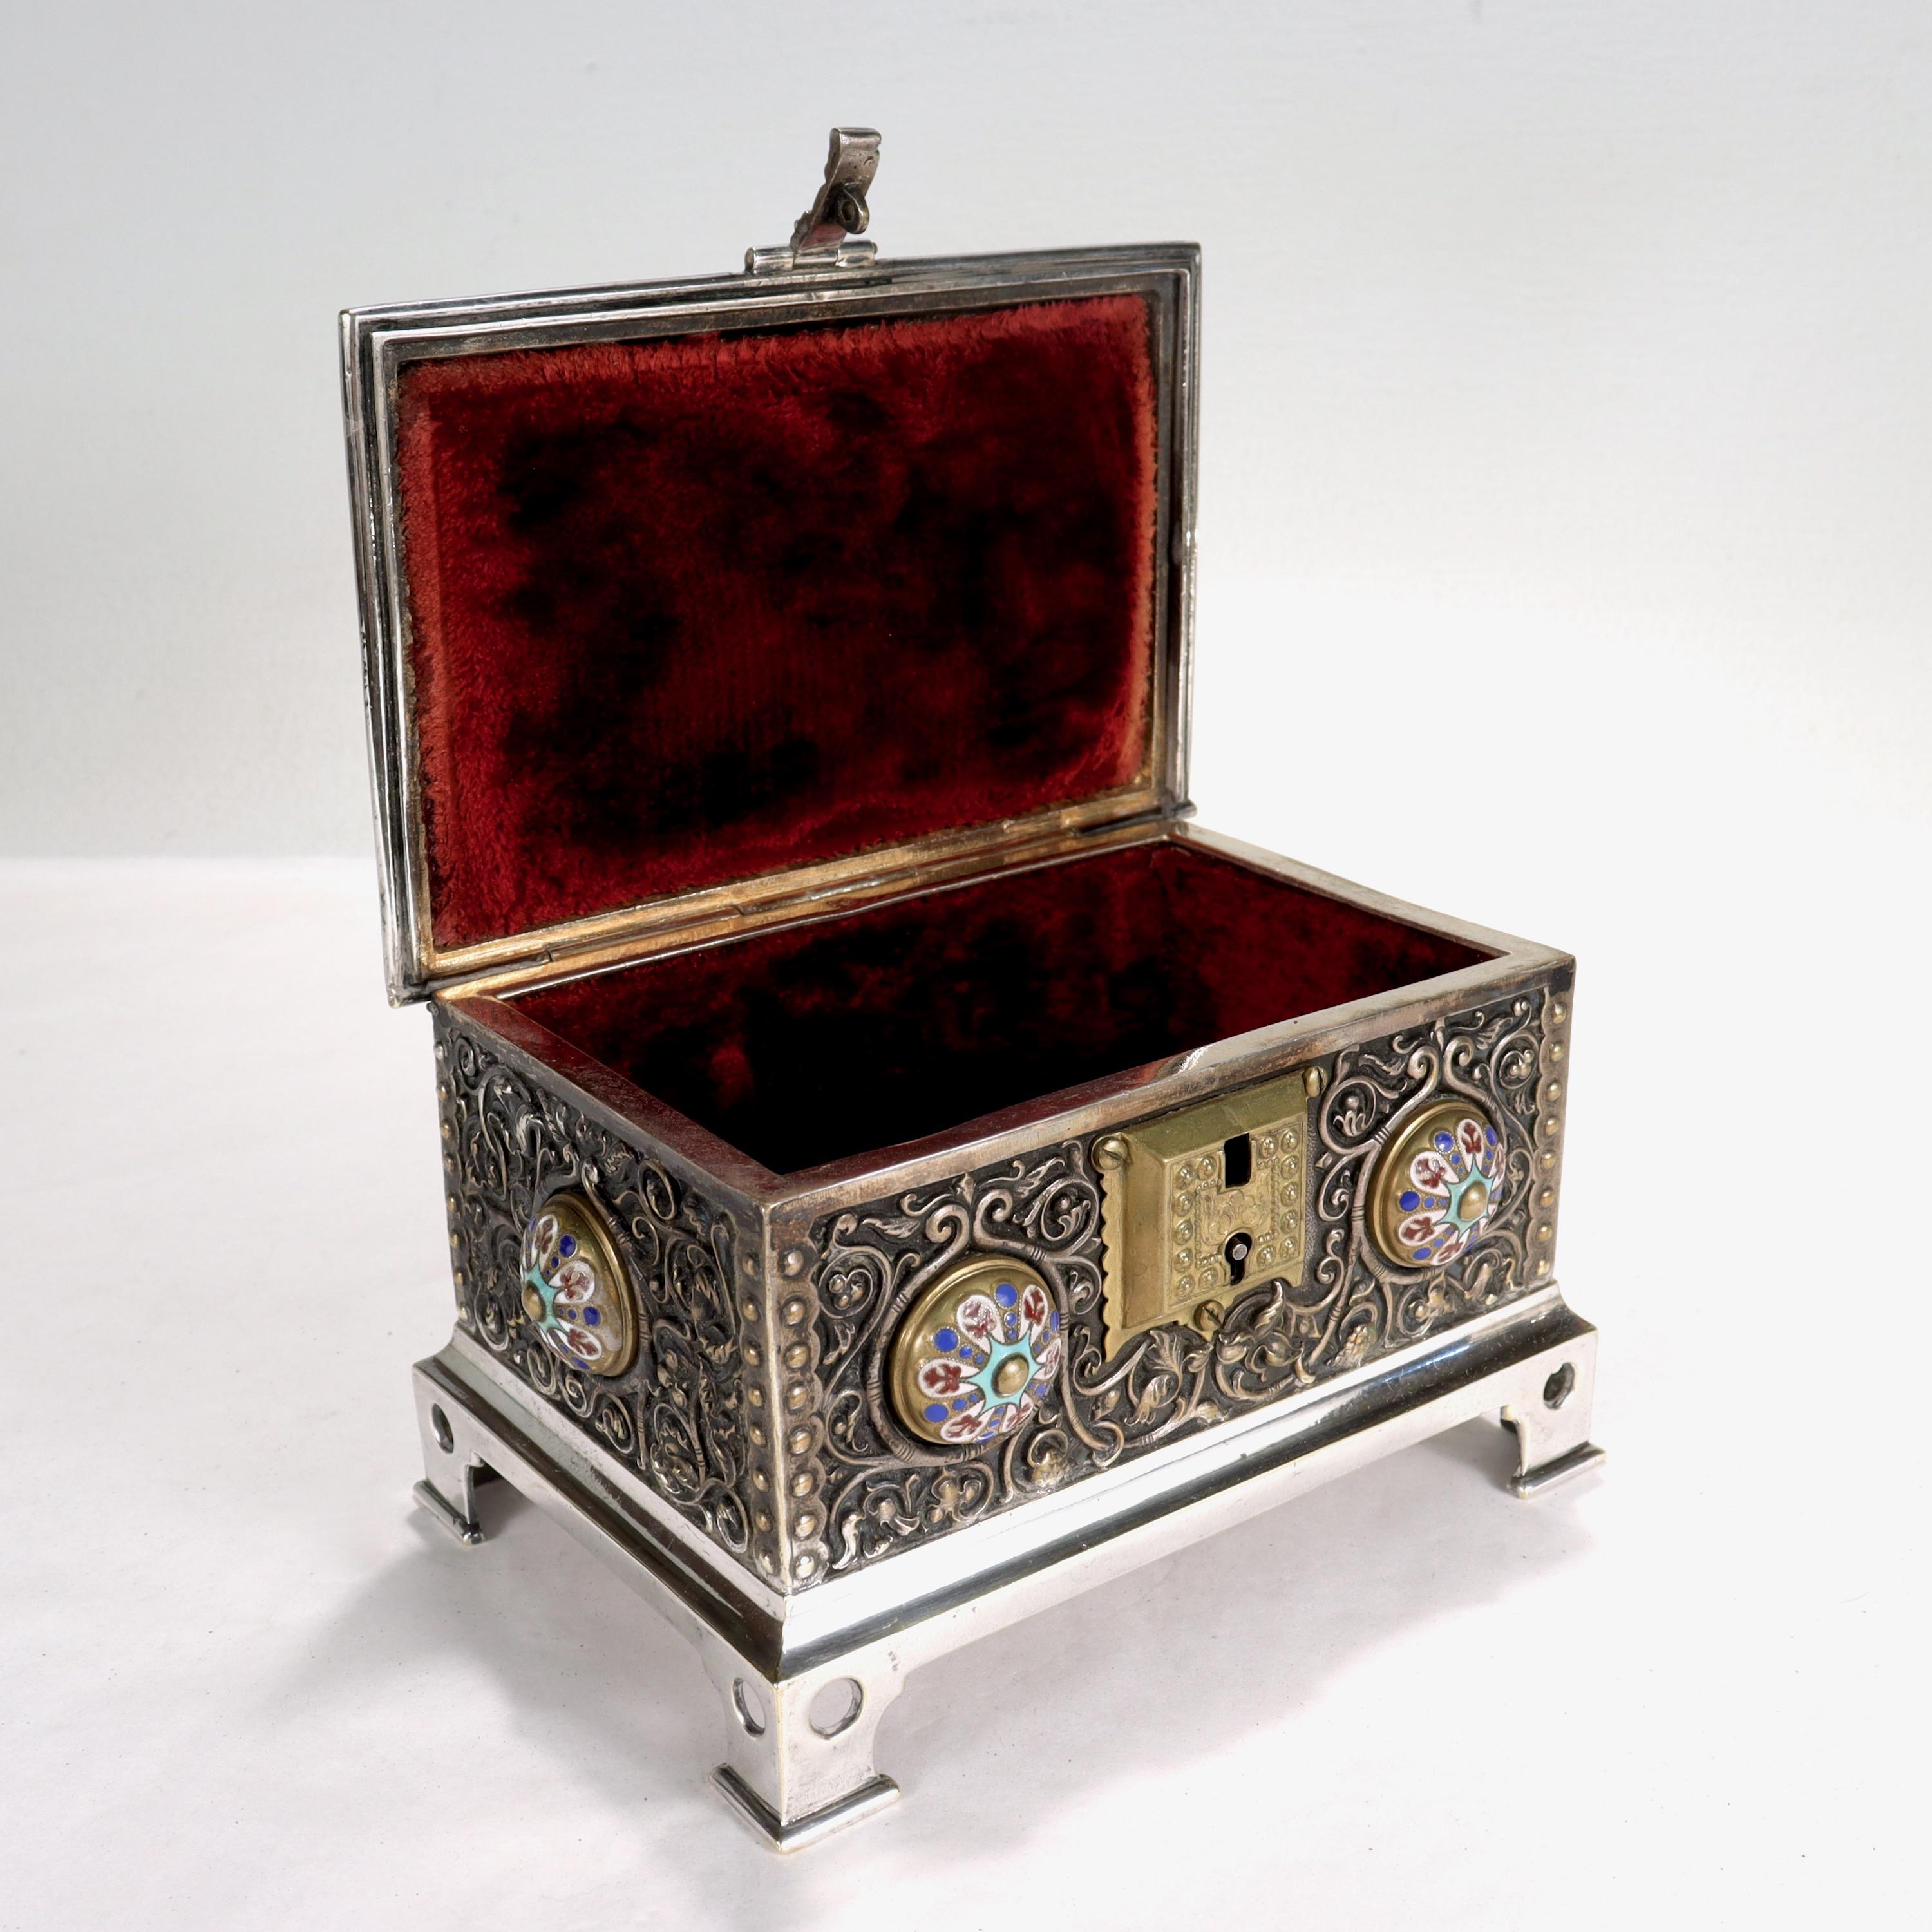 Antique Silver Plated & Enameled Table Box or Casket in the Russian Taste For Sale 3